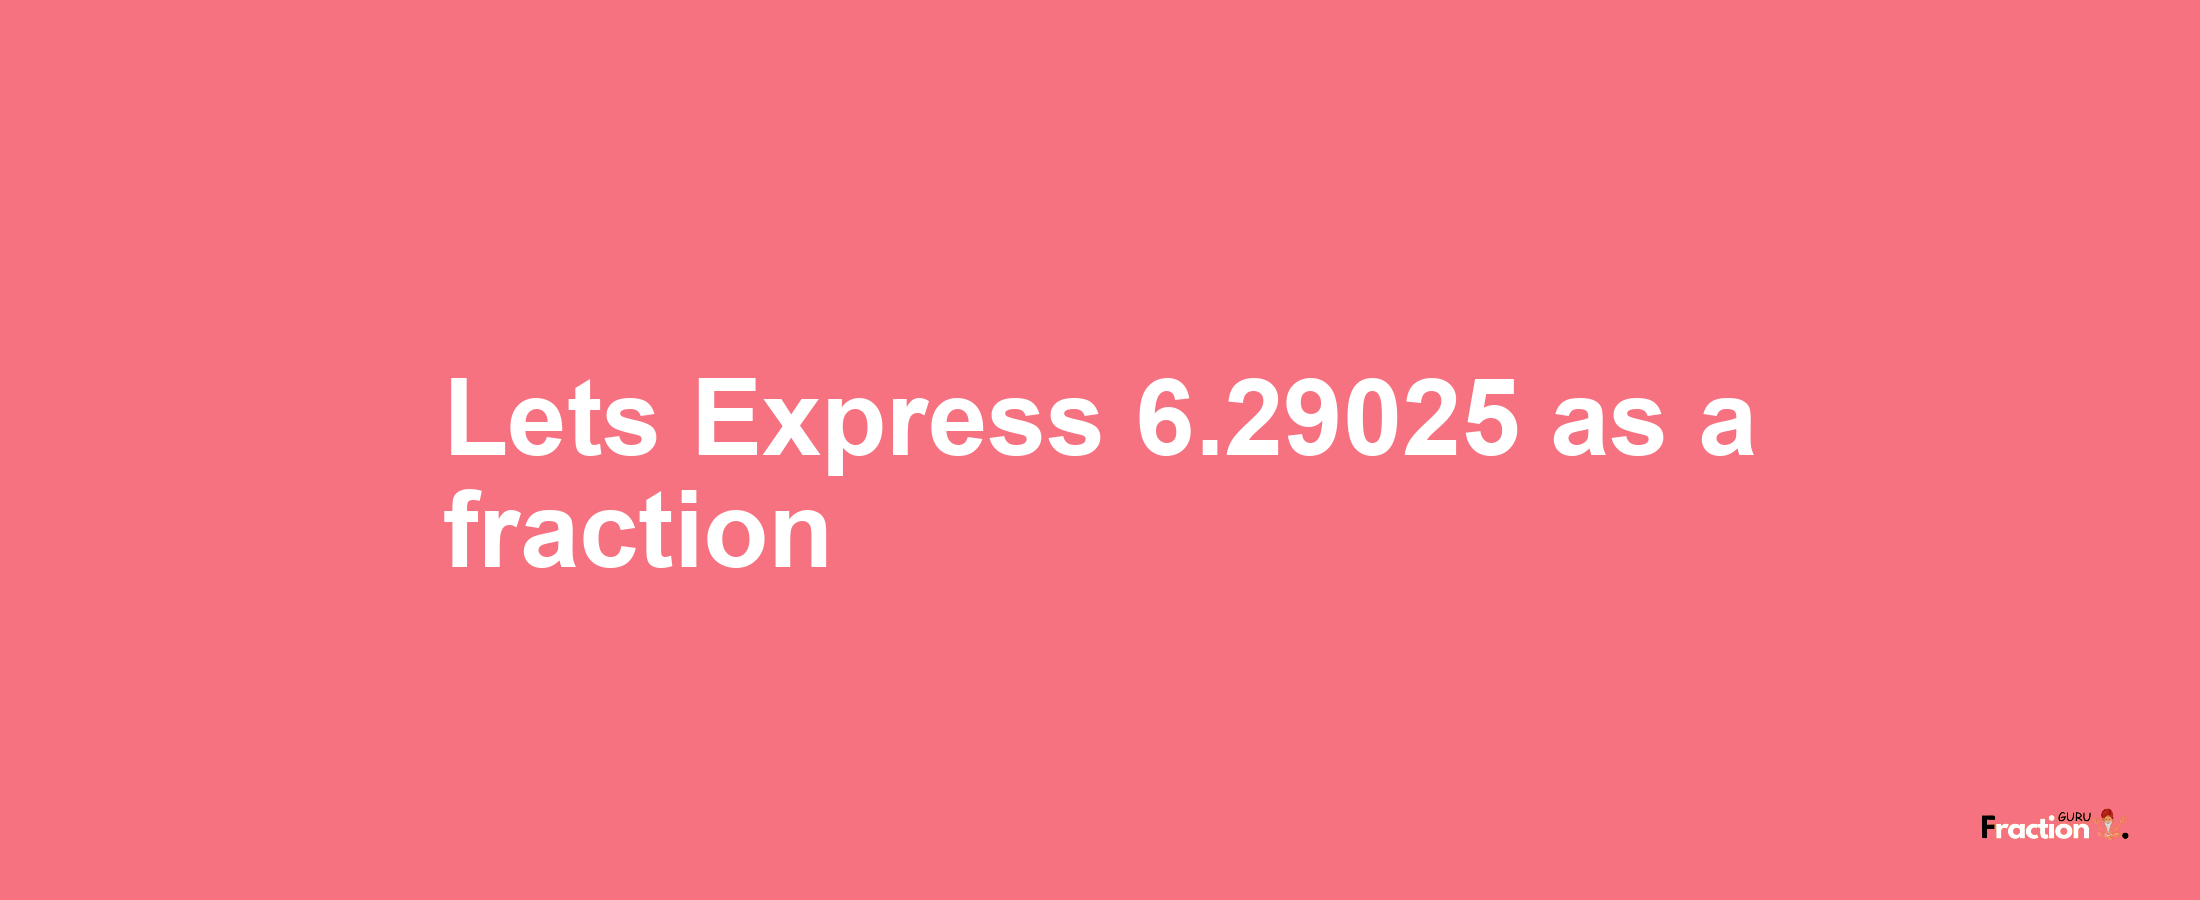 Lets Express 6.29025 as afraction